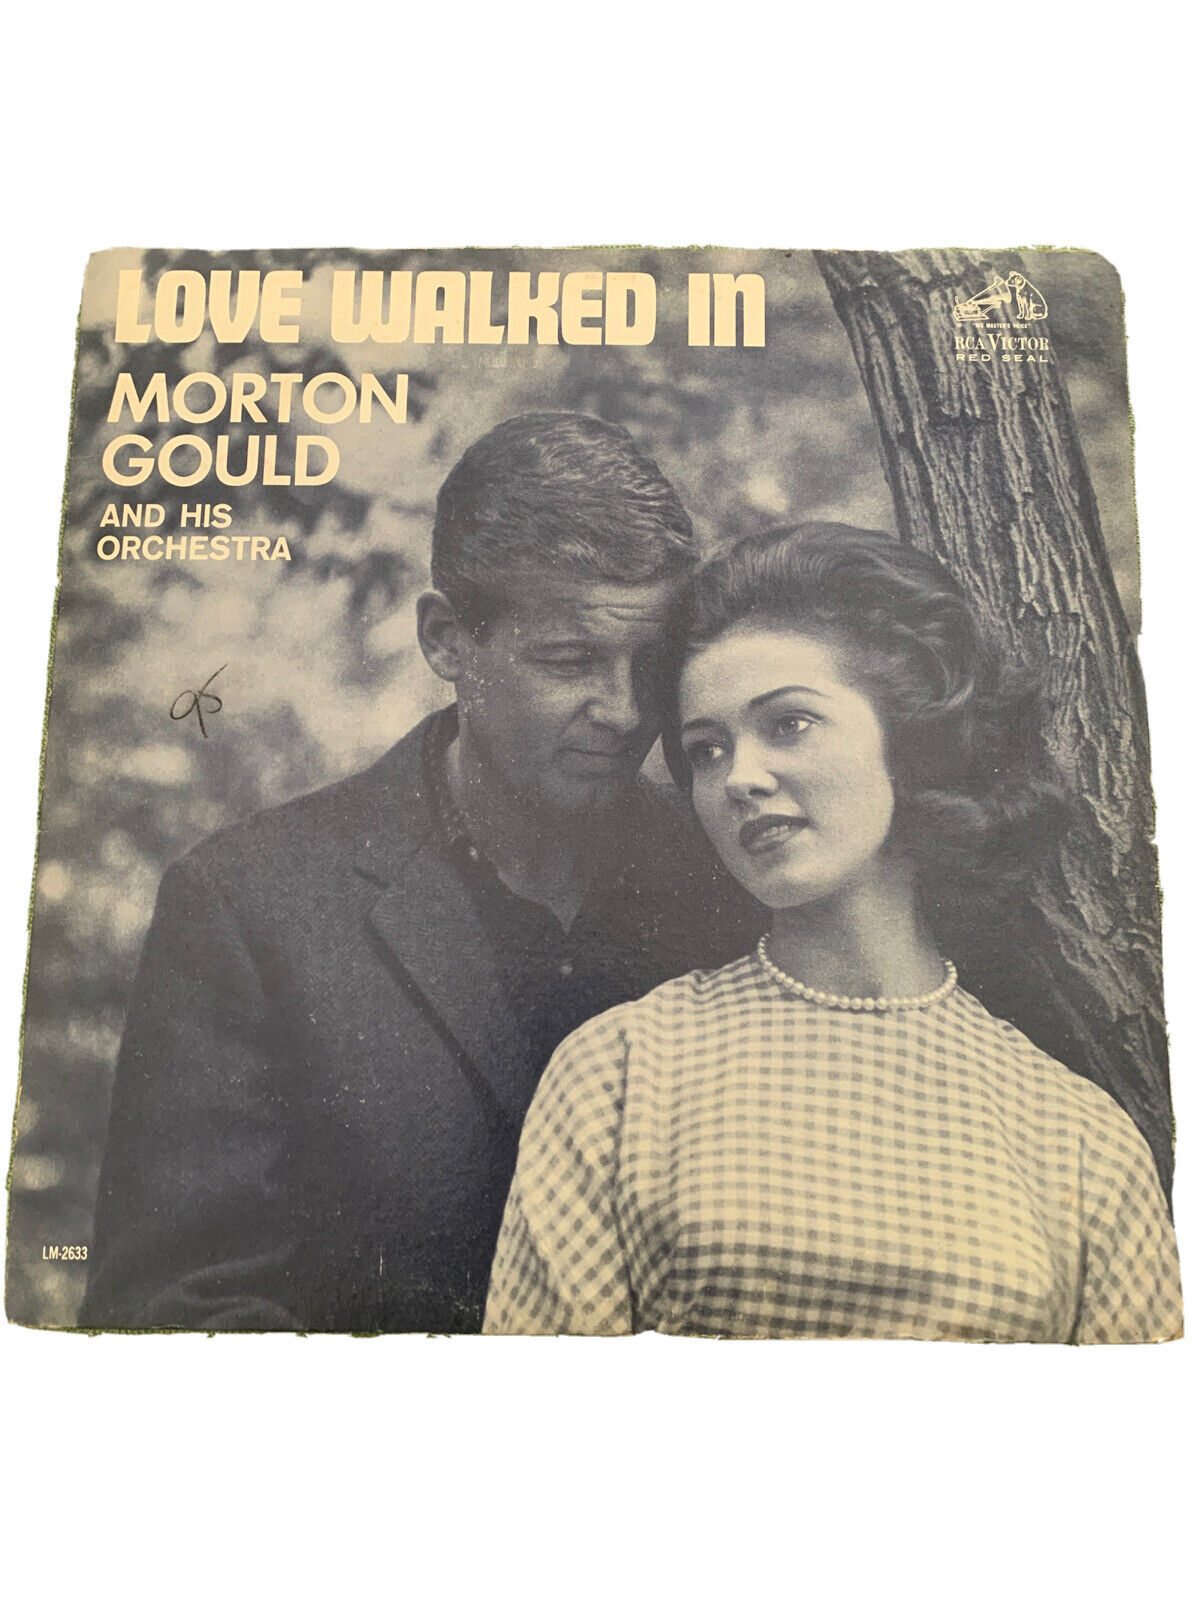 MORTON GOULD ORCHESTRA  LOVE WALKED IN 1962 Columbia LP Vinyl LSC-2633 NEAR MINT